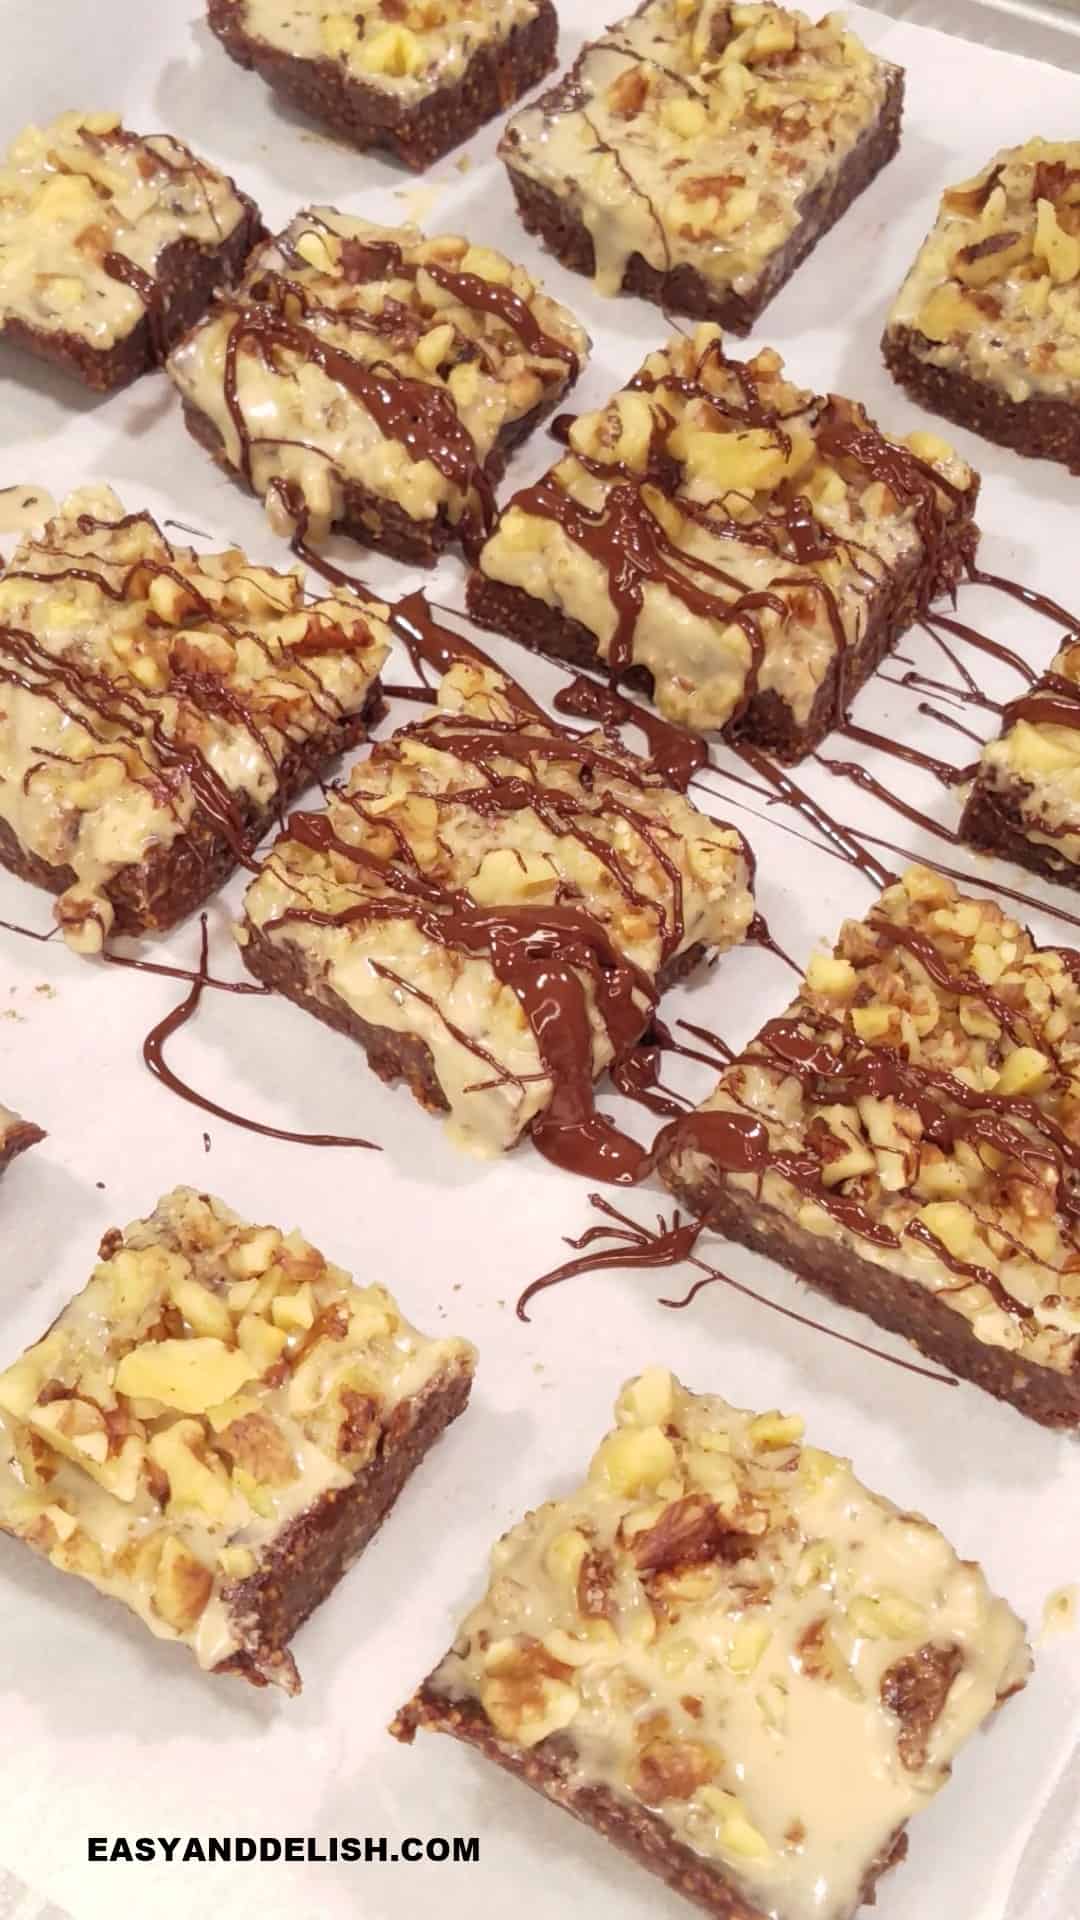 melted chocolate drizzled over the top of the sliced gluten-free fig bars. 